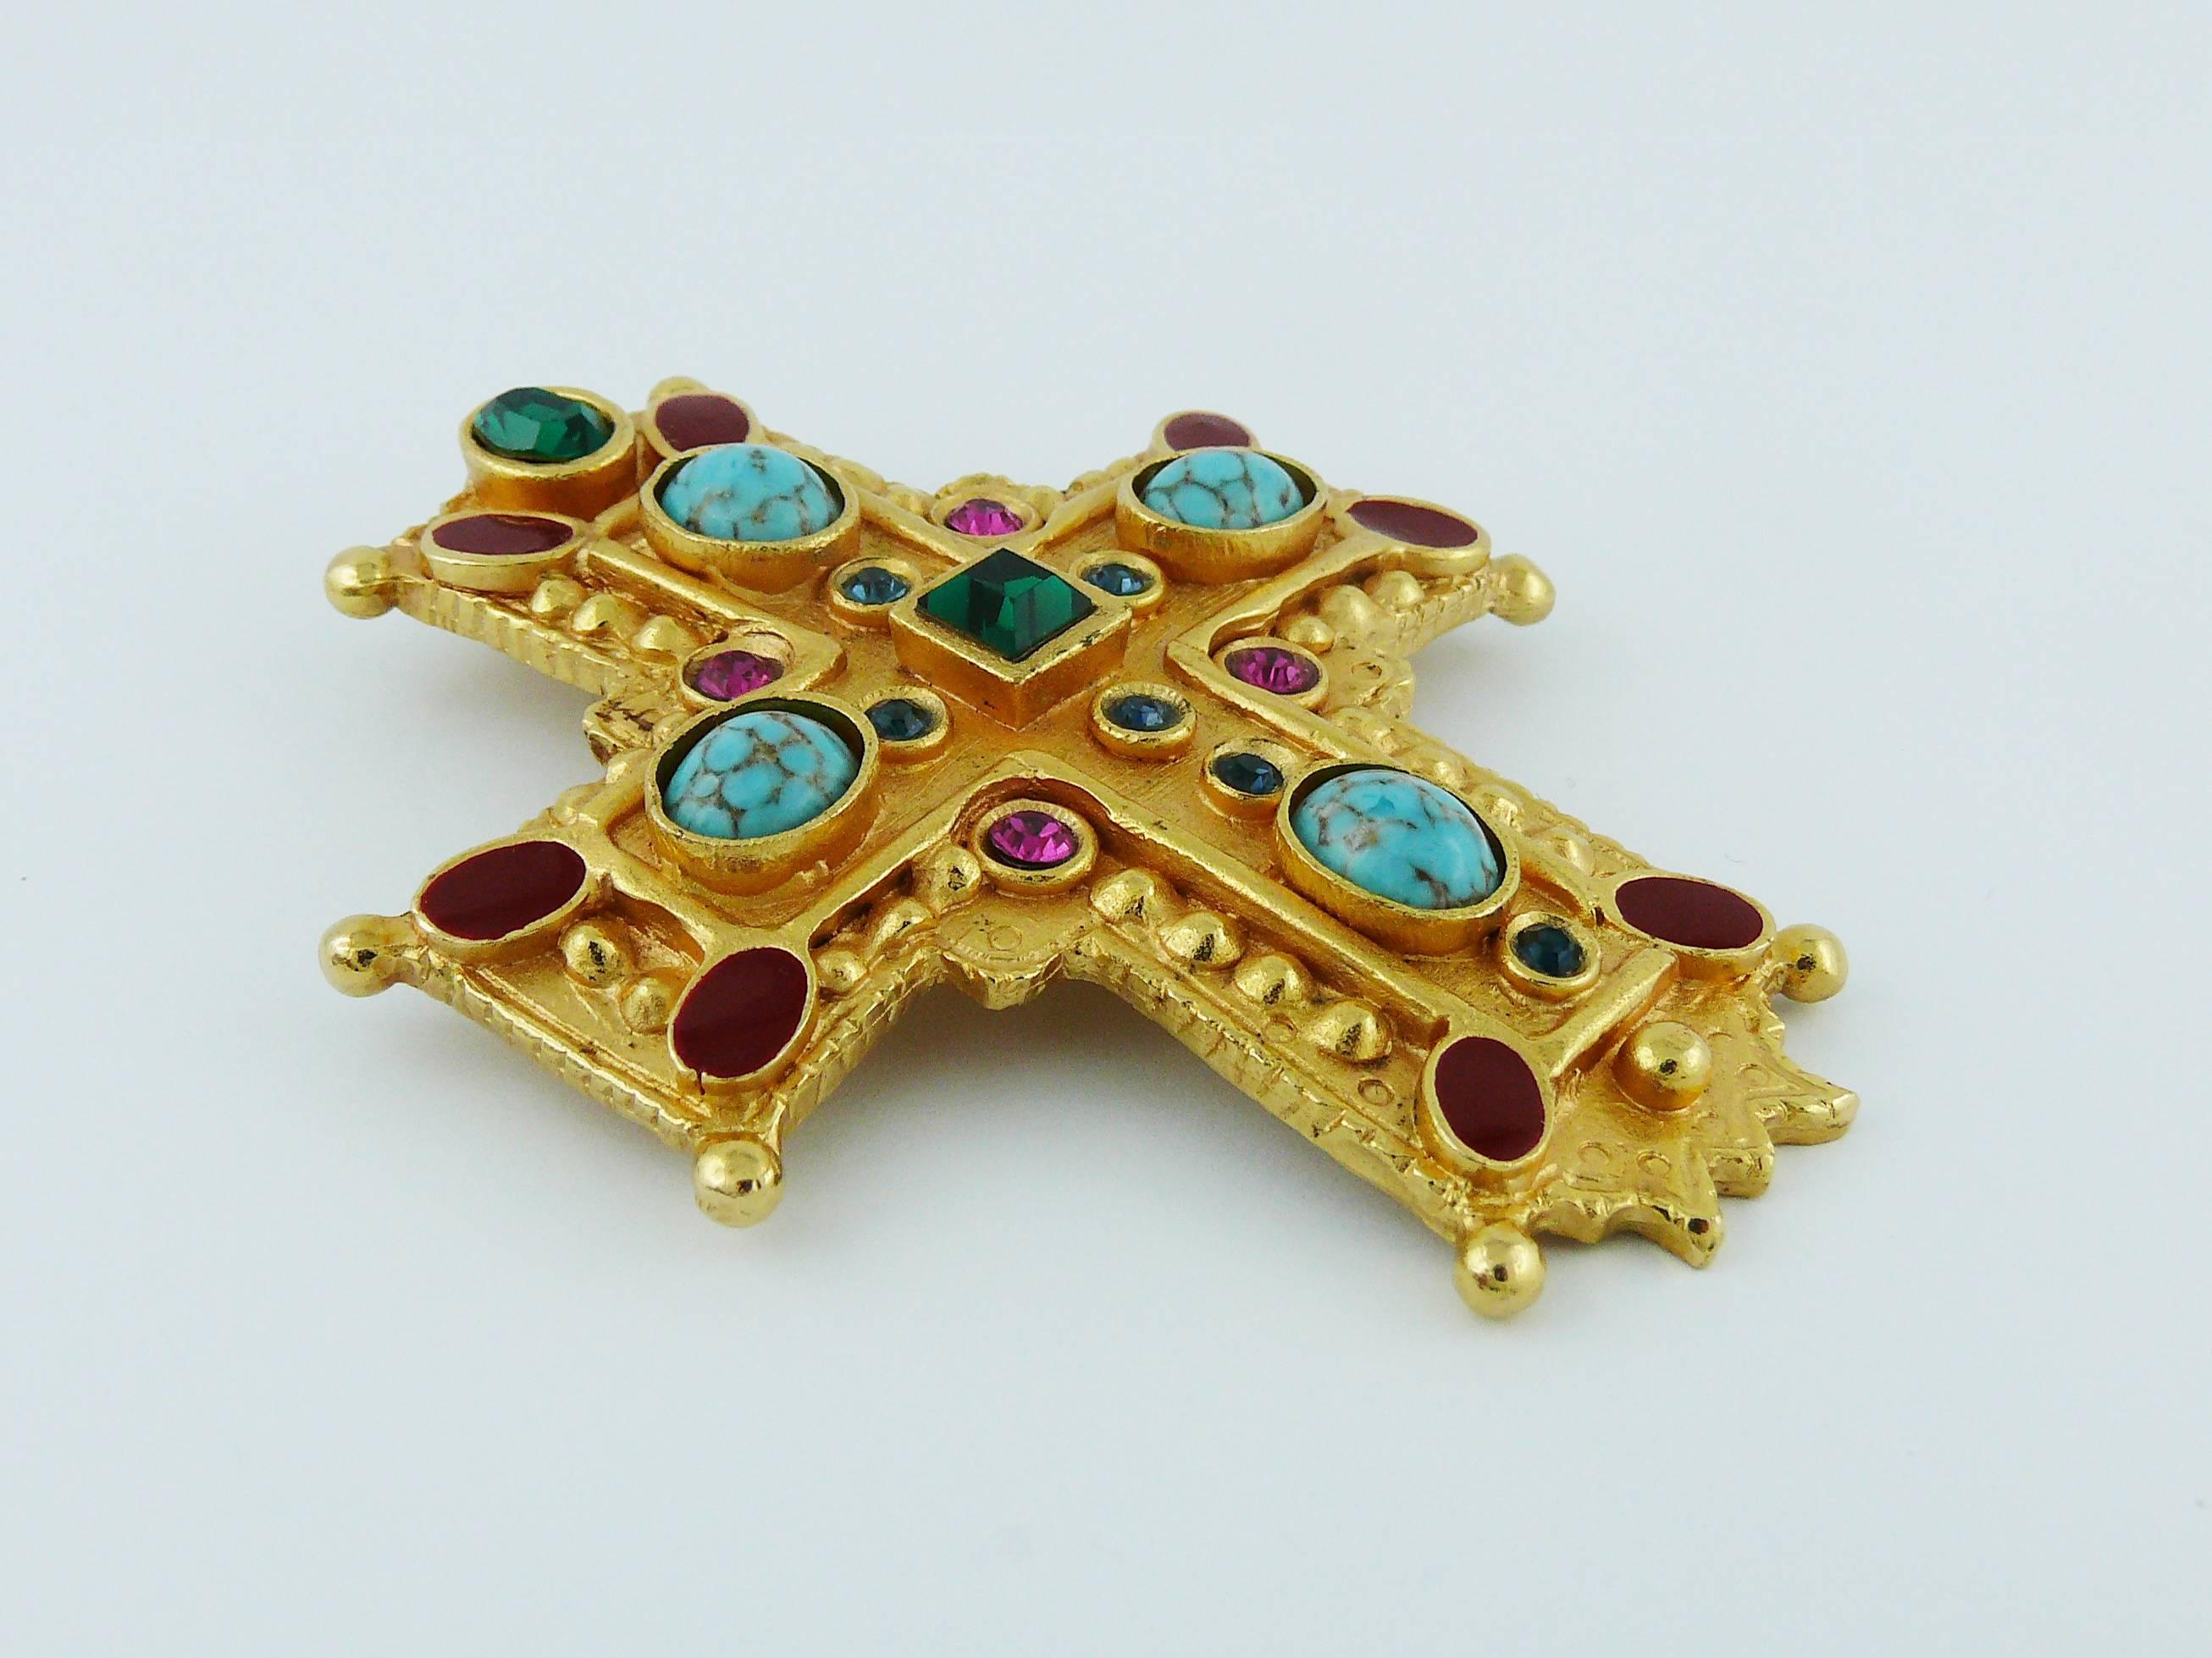 CHRISTIAN LACROIX vintage rare massive jewelled Medieval inspired iconic gold toned cross brooch pendant.

Detailed gold tone metal embellished with multicolored crystals, faux turquoise stones and red enamel.

Can be worn as a brooch or a